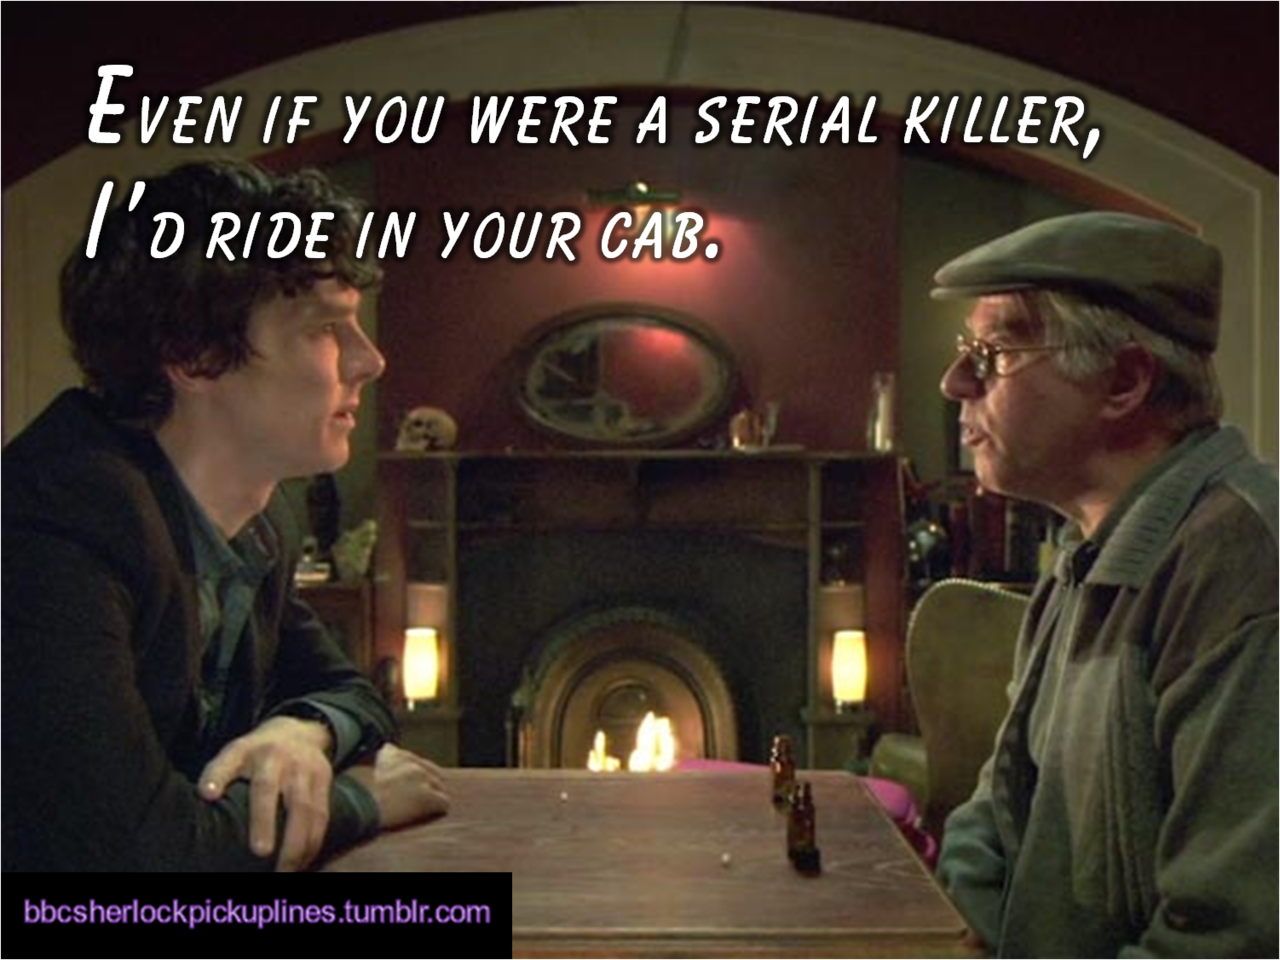 &ldquo;Even if you were a serial killer, I&rsquo;d ride in your cab.&rdquo;